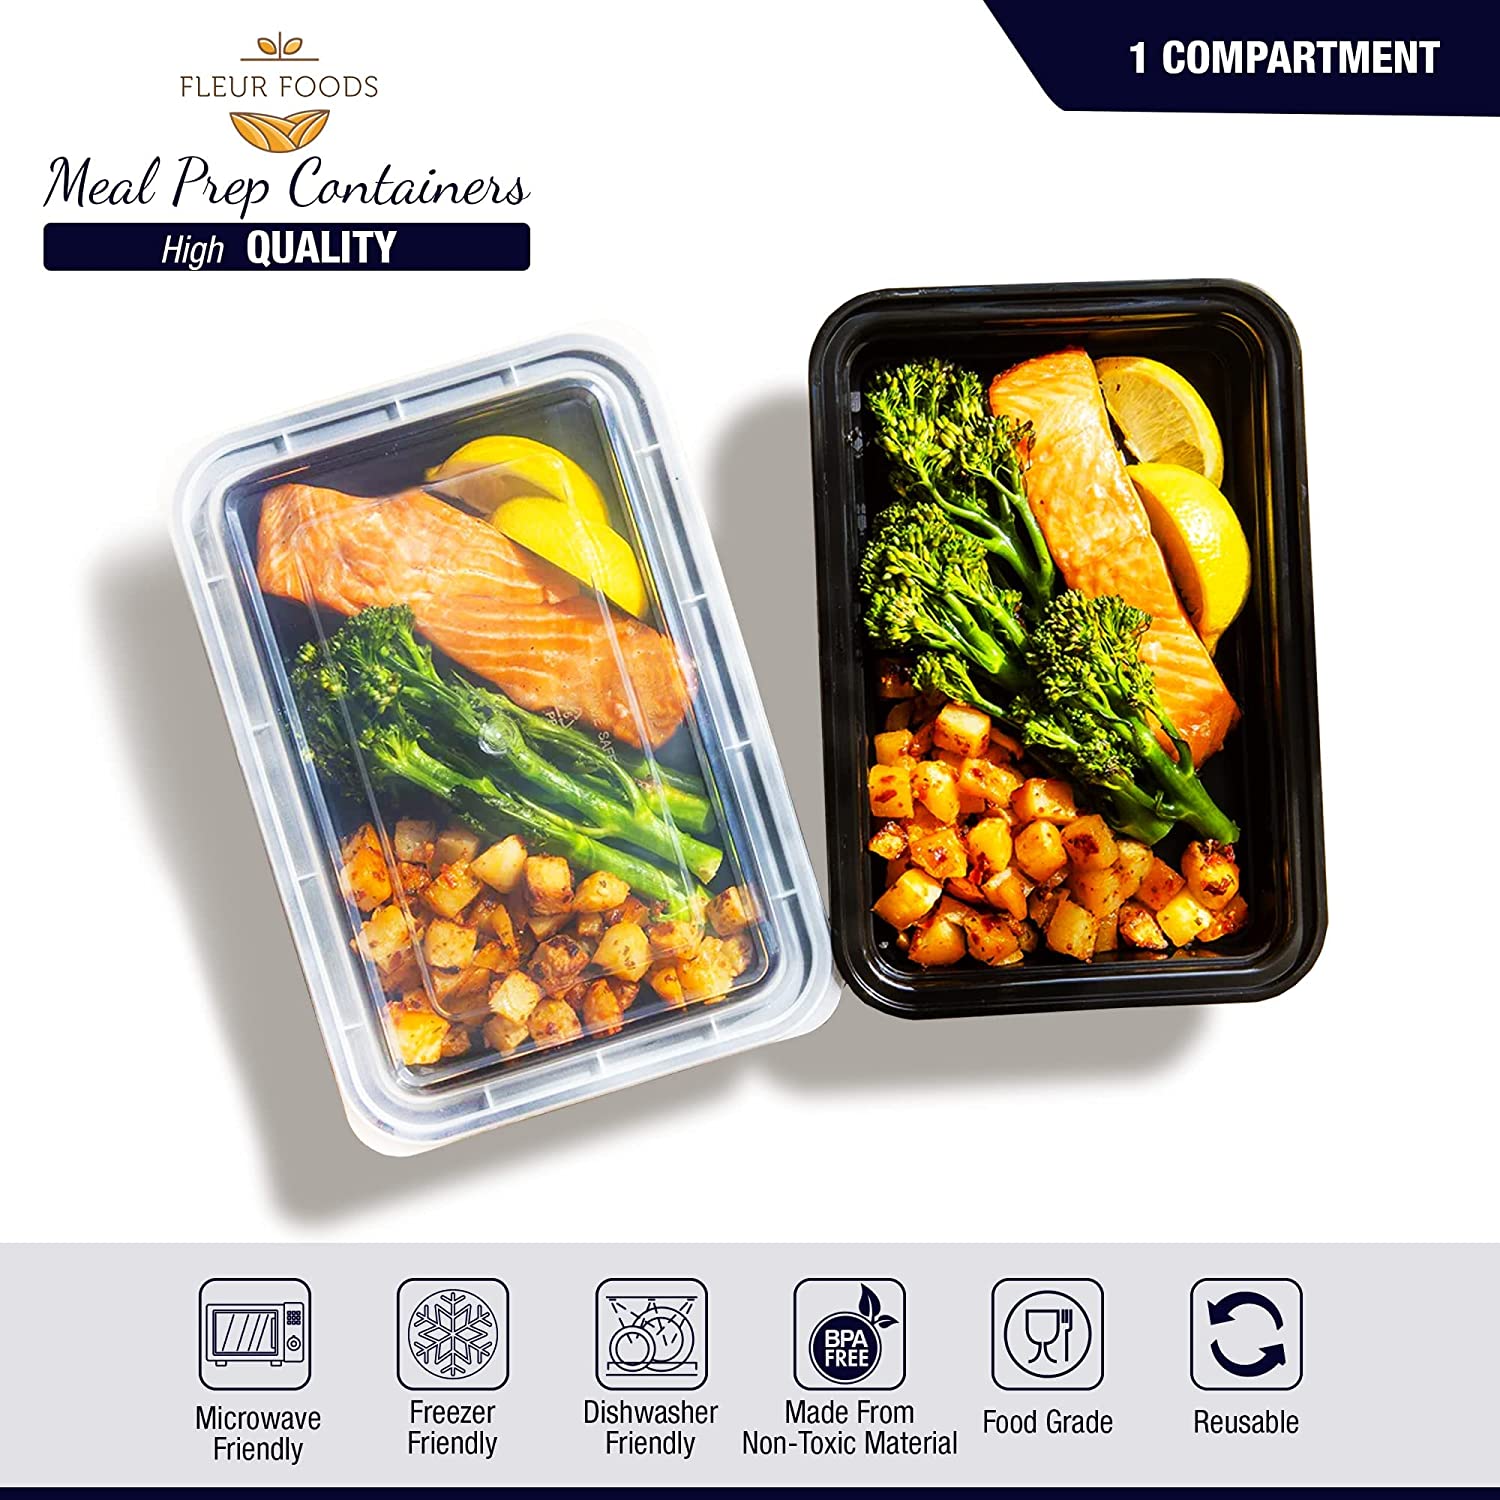 Meal Prep Containers - Food Storage Prep Containers Certified BPA